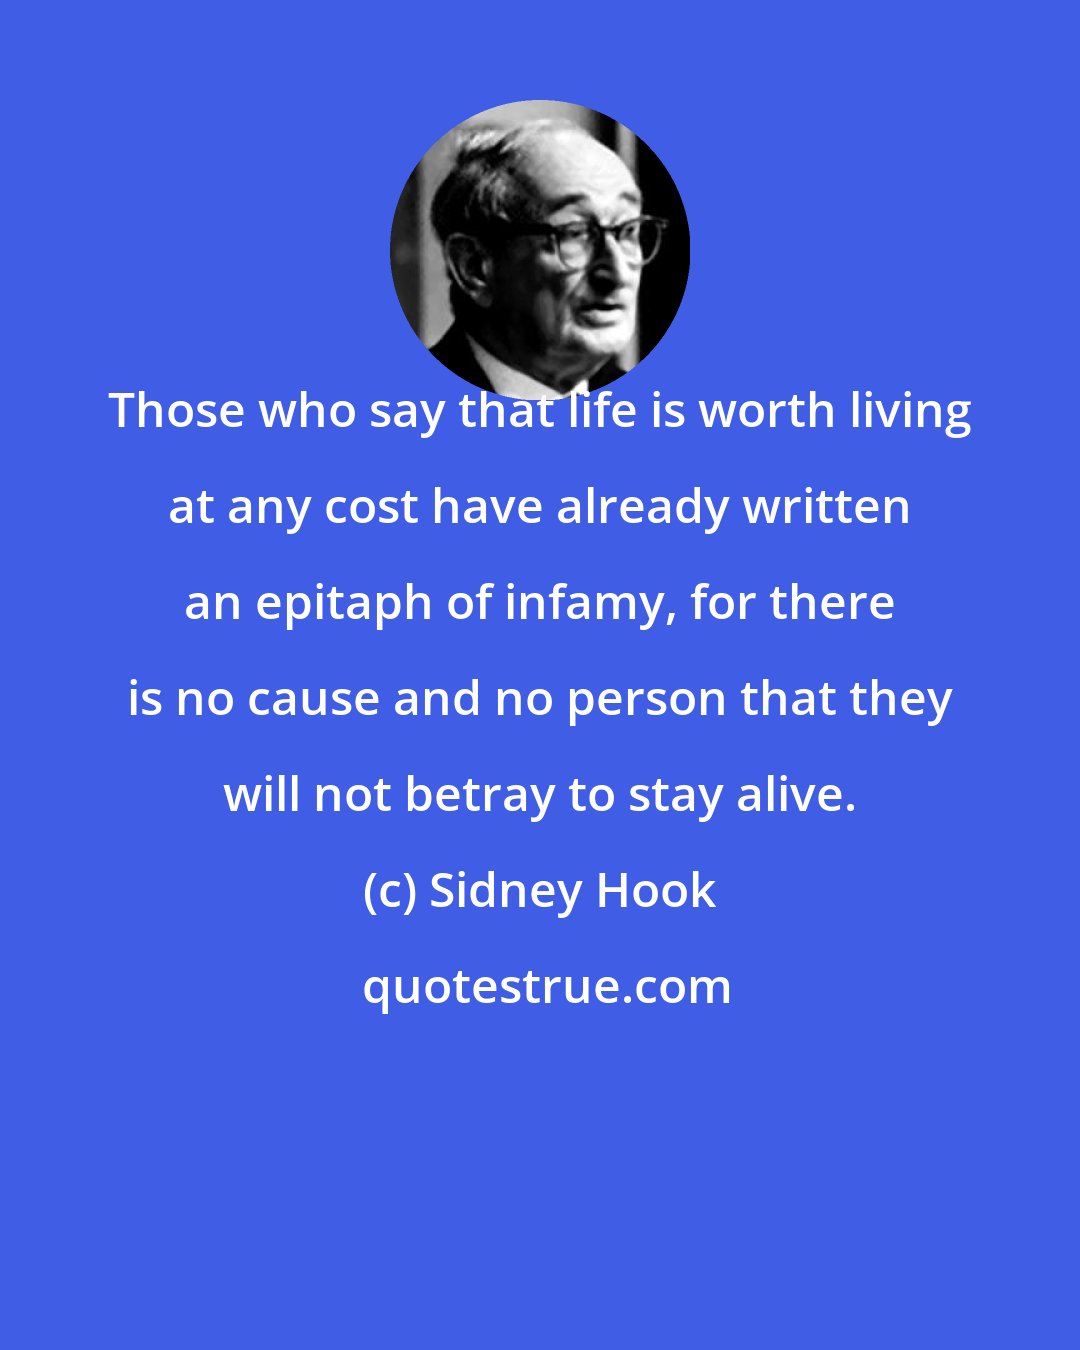 Sidney Hook: Those who say that life is worth living at any cost have already written an epitaph of infamy, for there is no cause and no person that they will not betray to stay alive.